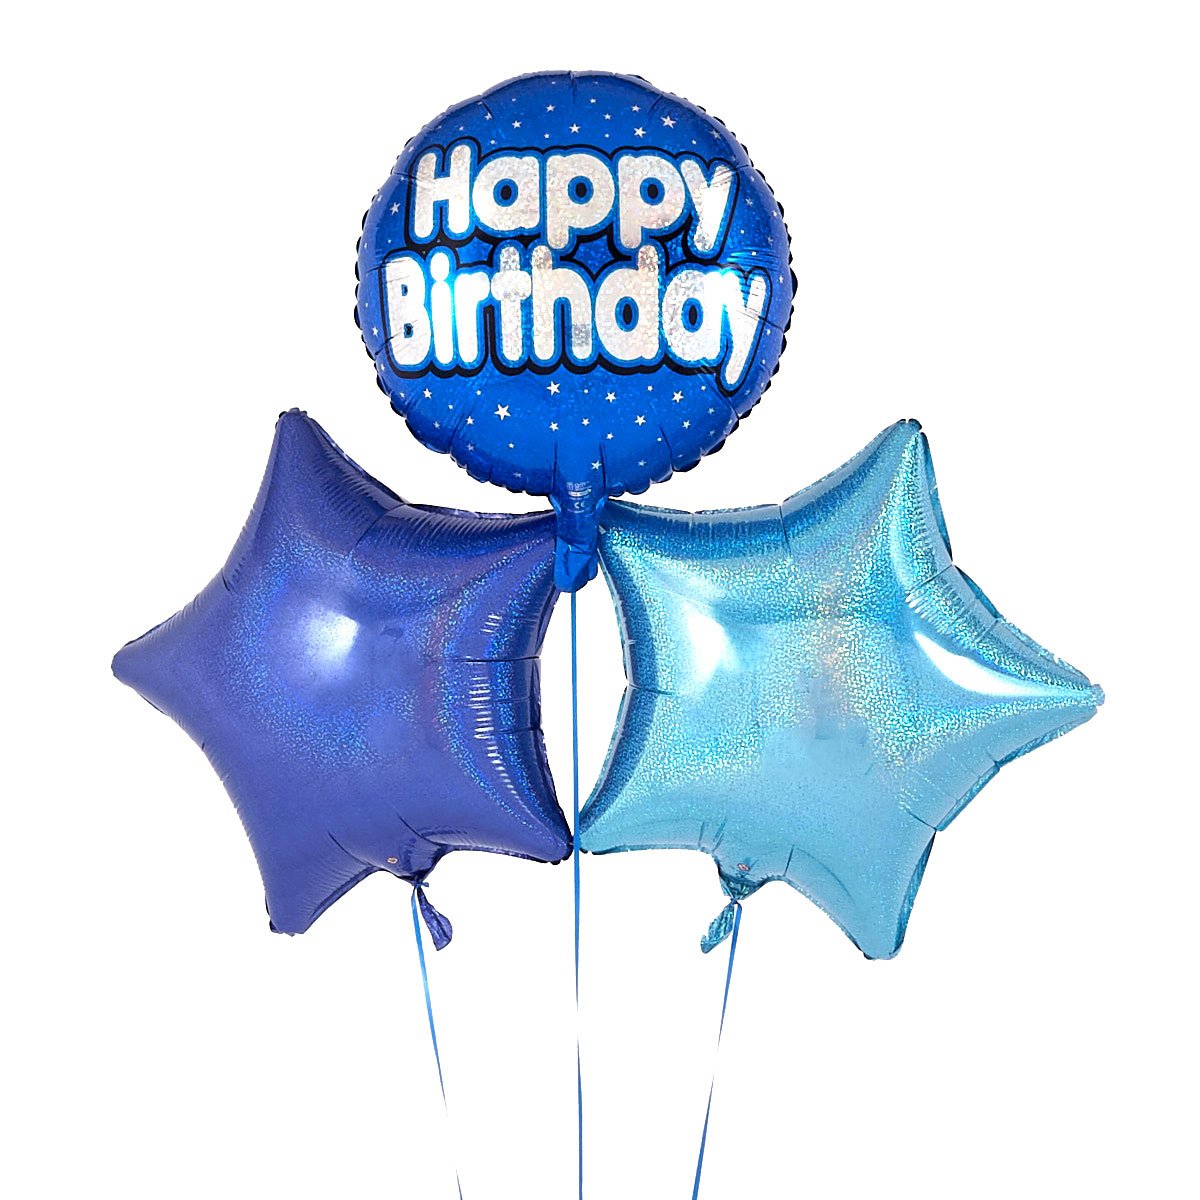 Blue 'Happy Birthday' Balloon Bouquet - DELIVERED INFLATED!